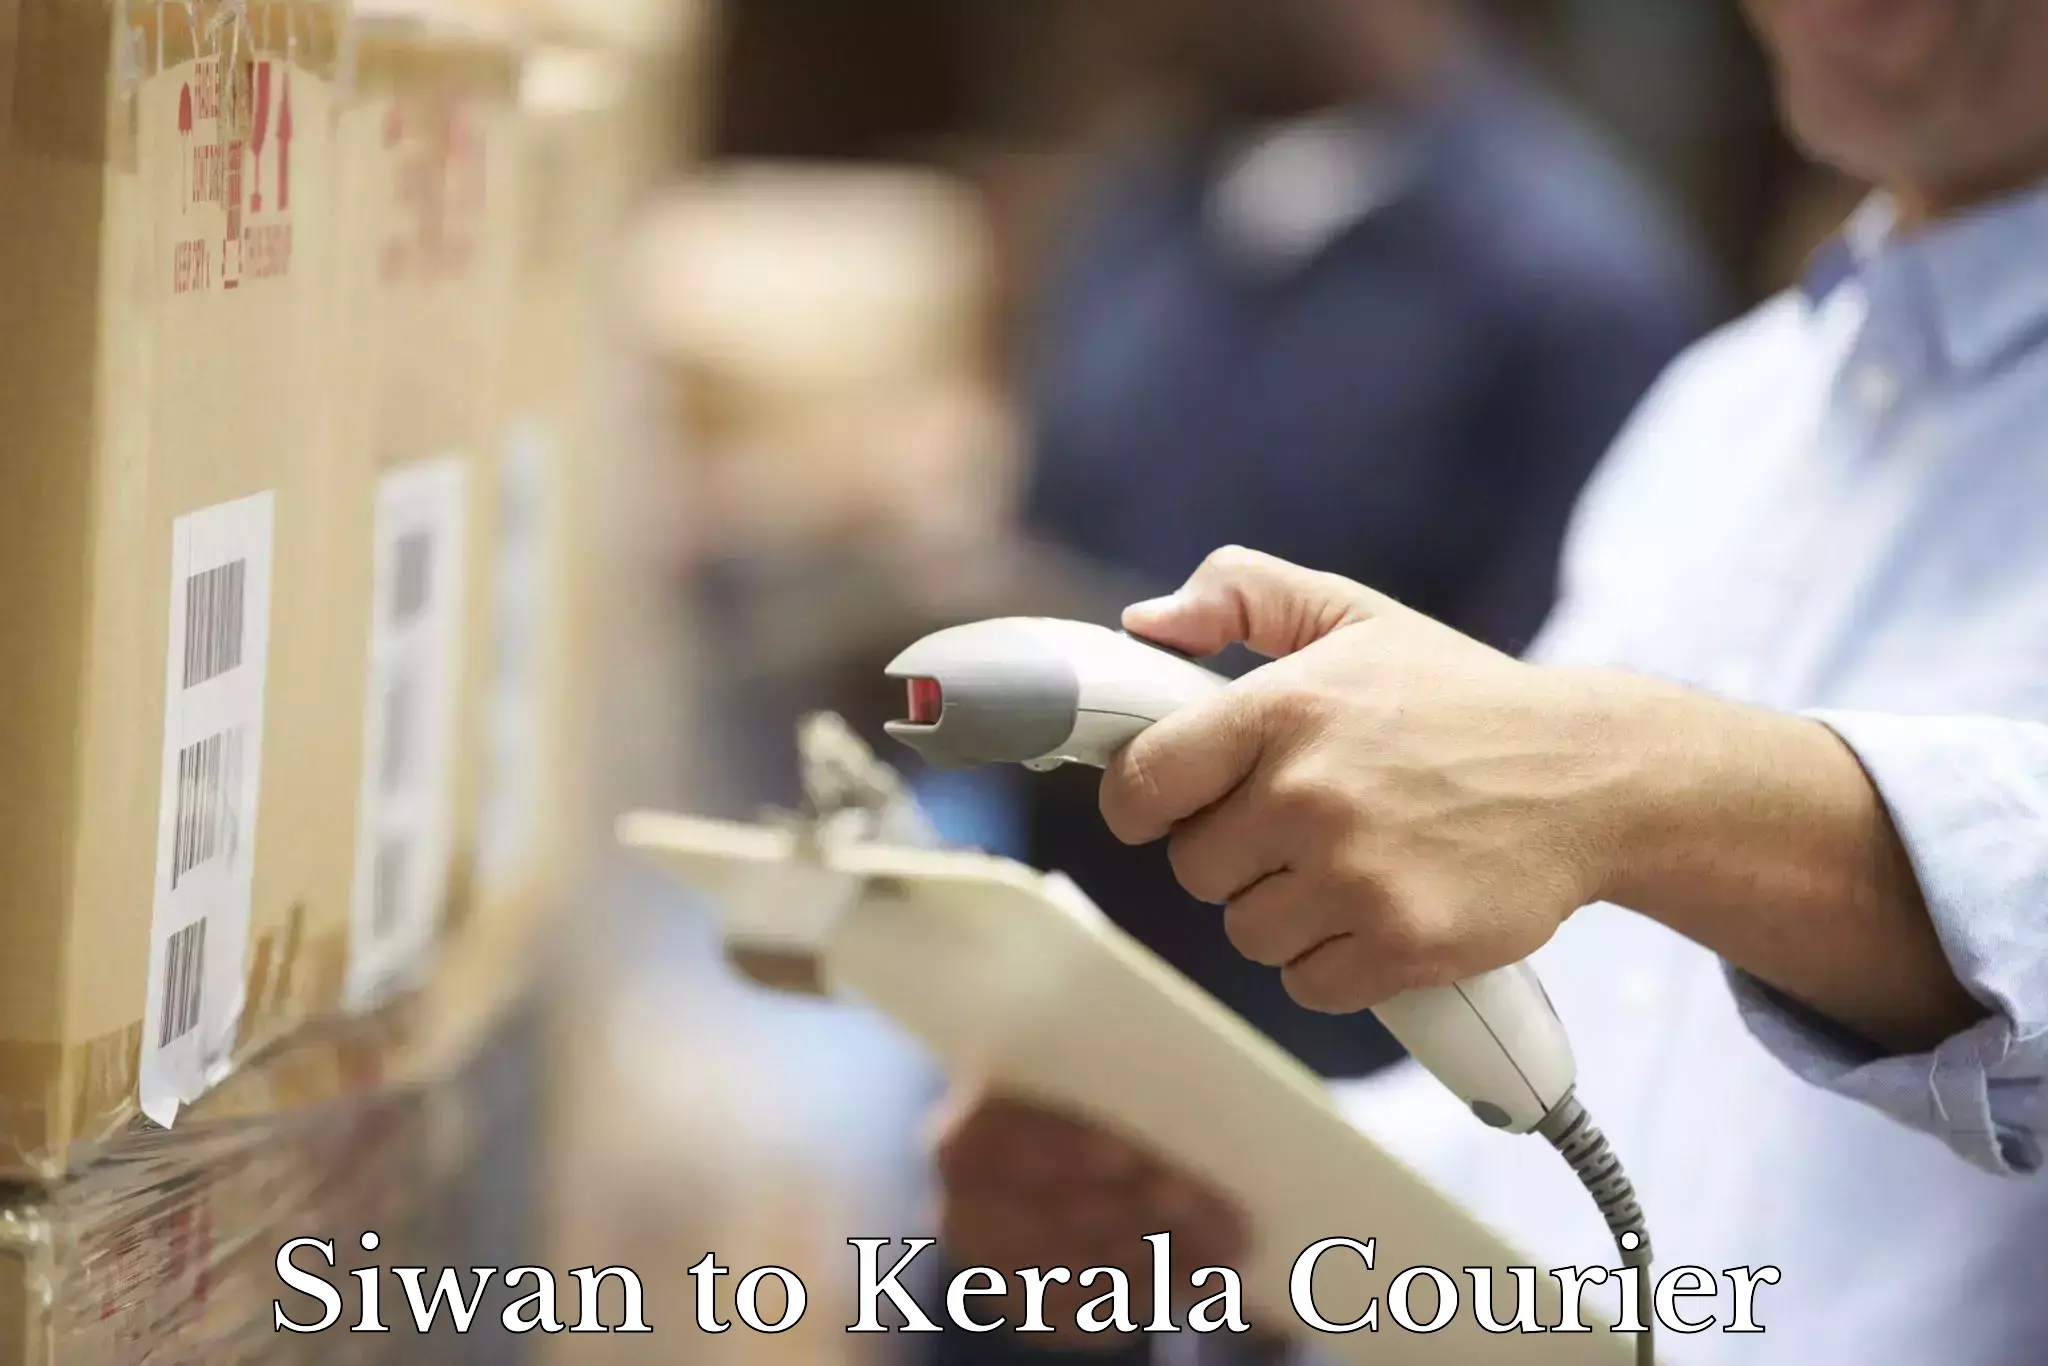 High-priority parcel service Siwan to Kochi